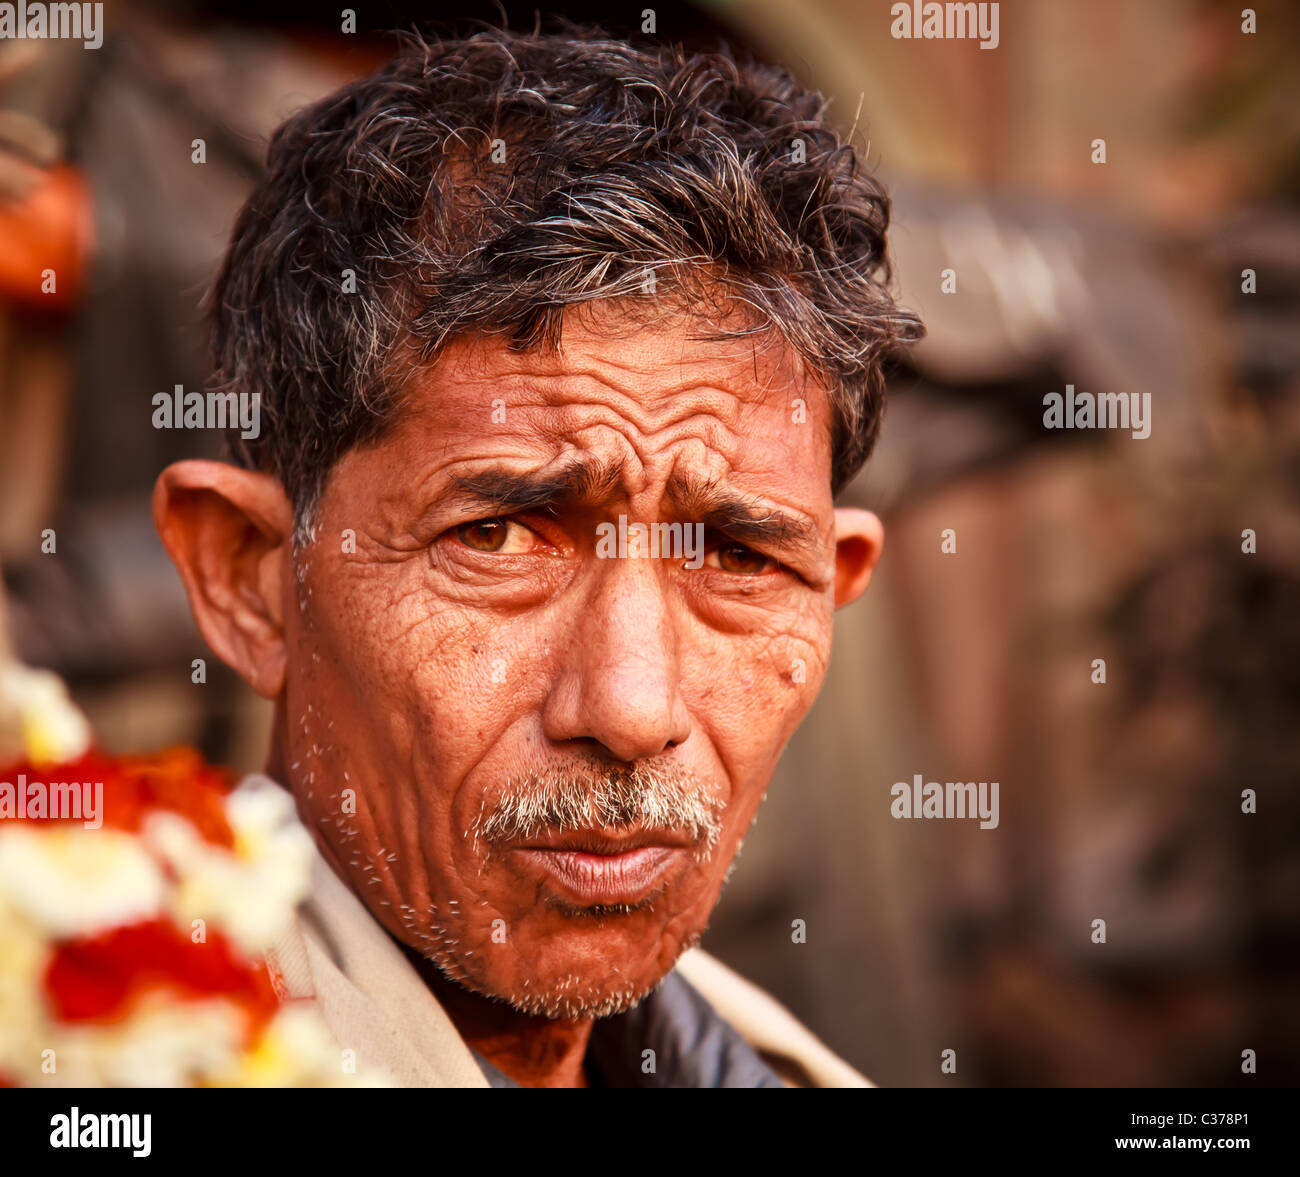 Portrait of a male flower seller from the Flower Market in Kolkata, West Bengal, India Stock Photo